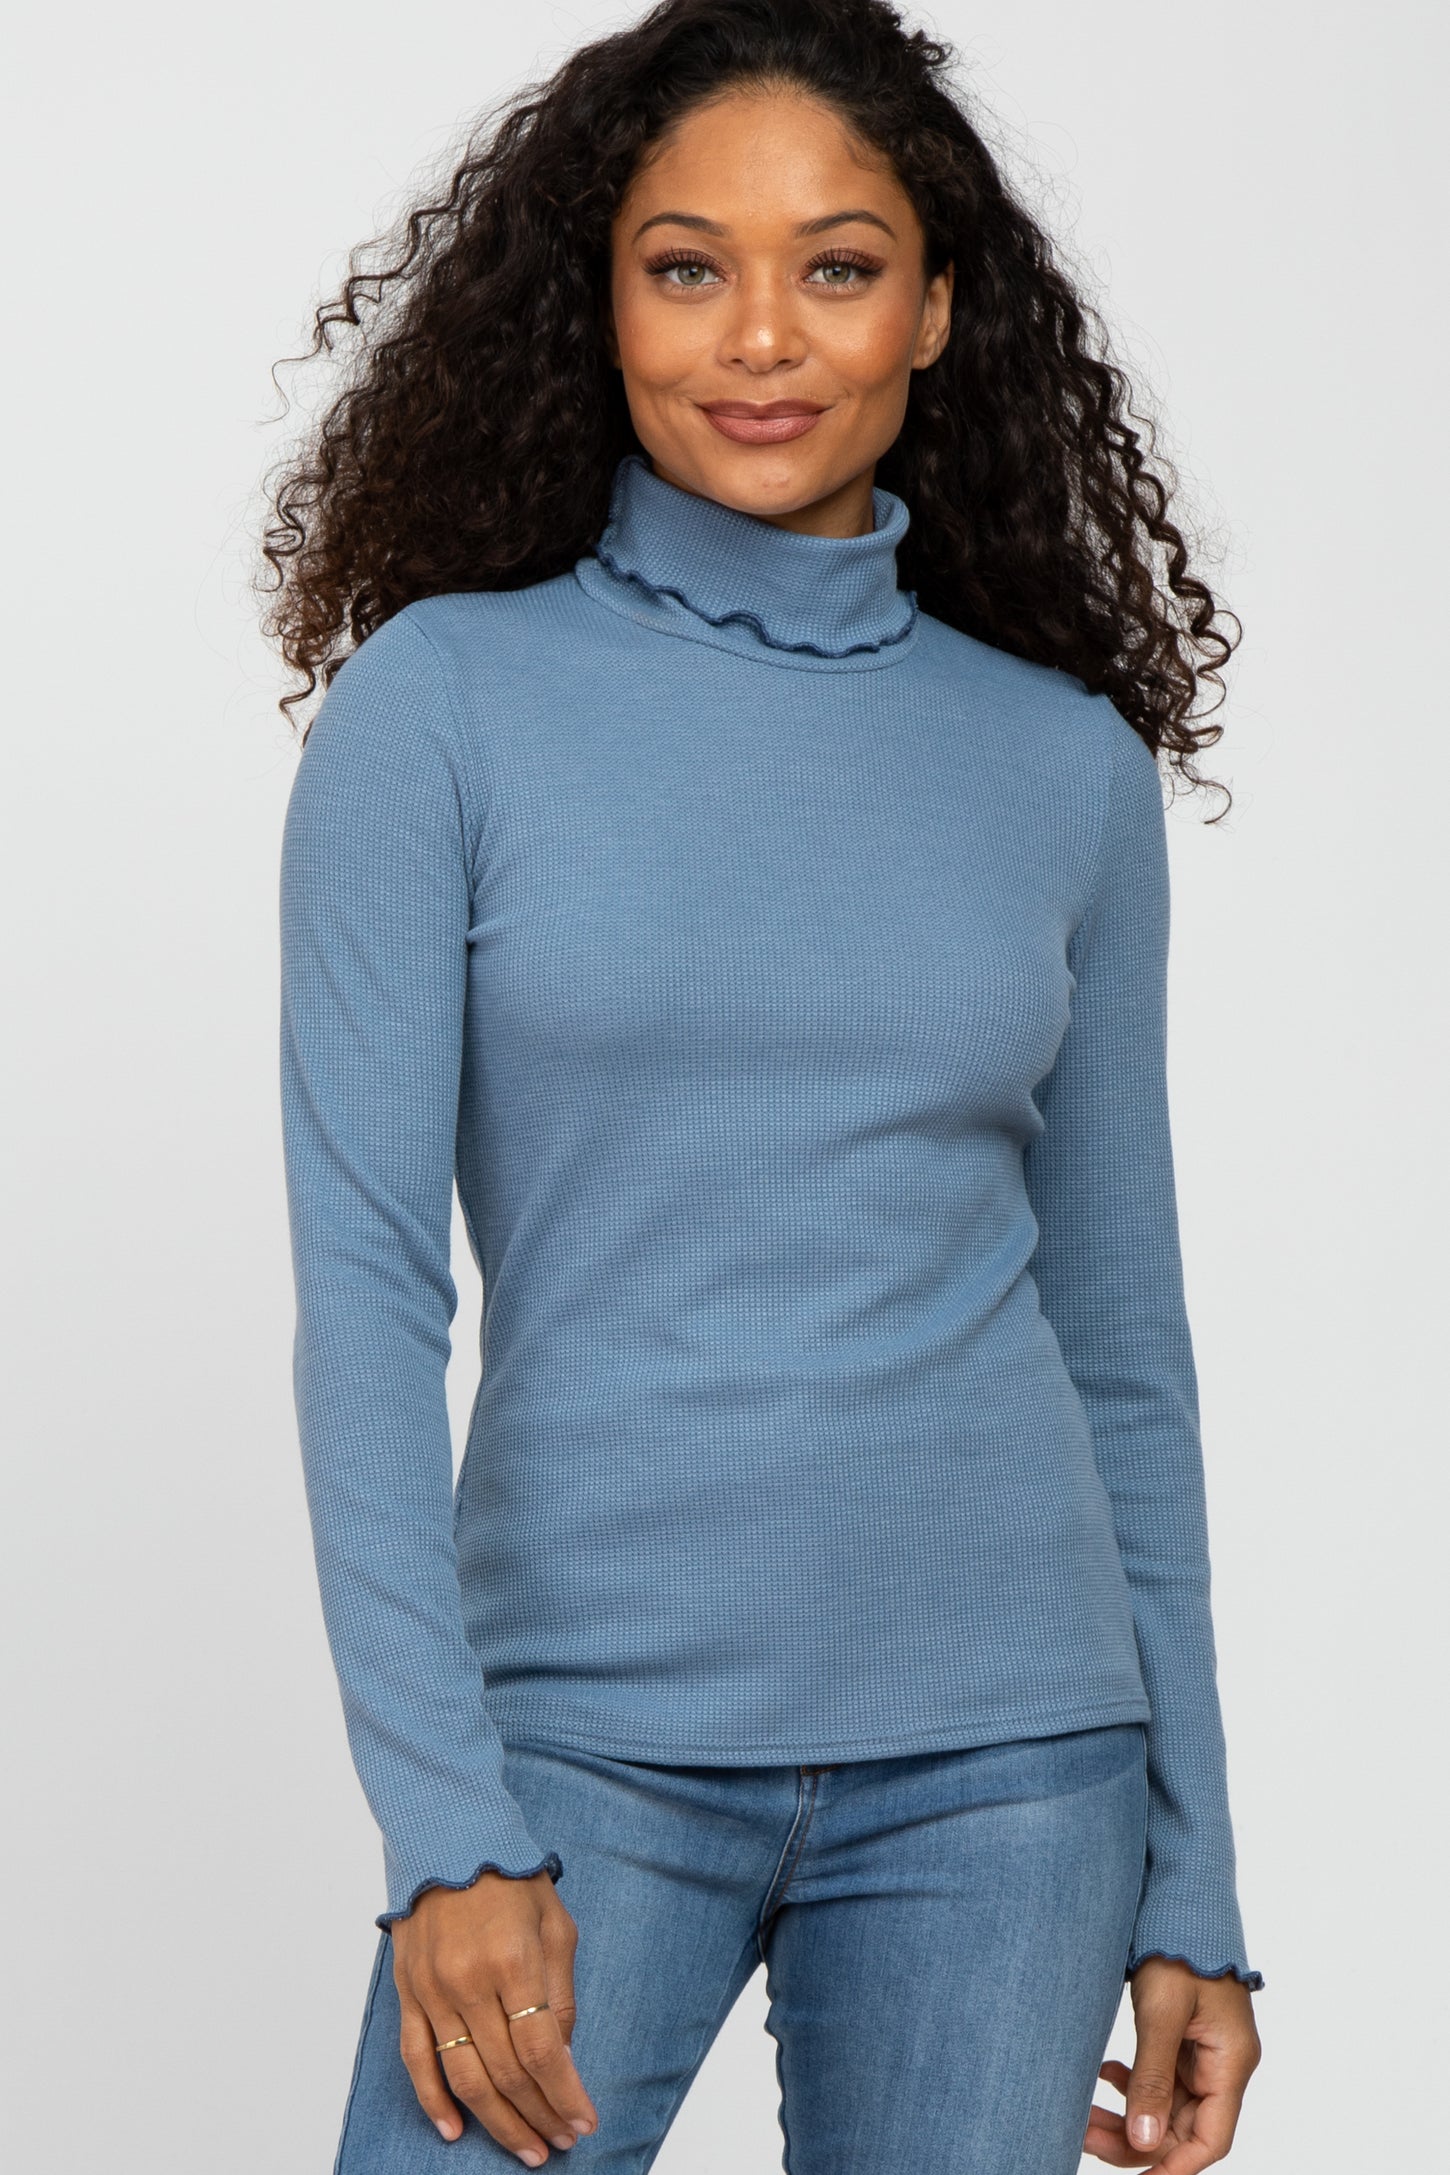 Blue Thermal Knit Turtle Neck Top